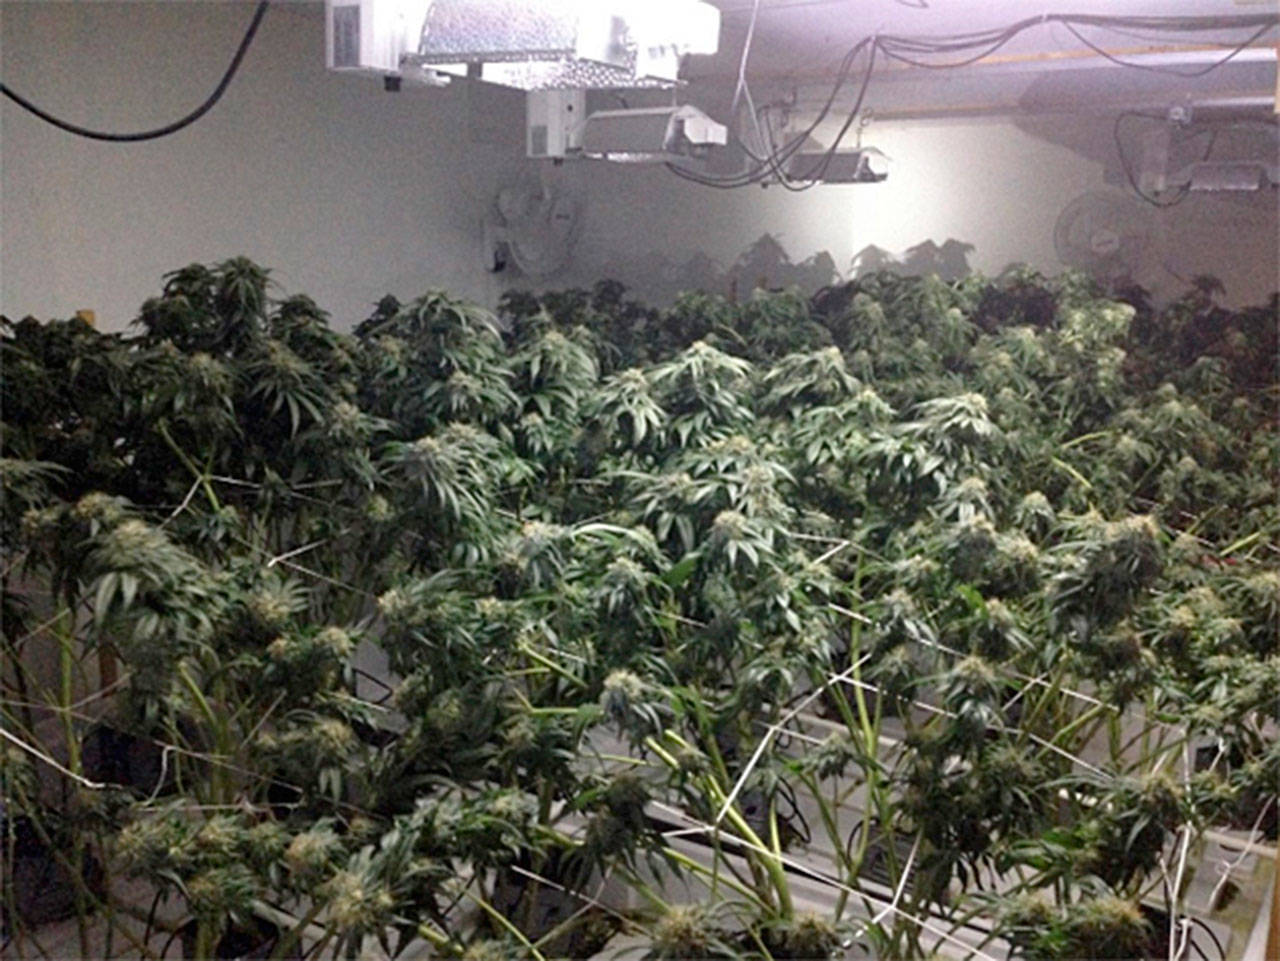 The scene inside of a house in the 14200 block of SE 38th St. Bellevue police found 775 marijuana plants. Photo courtesy of the Bellevue Police Department